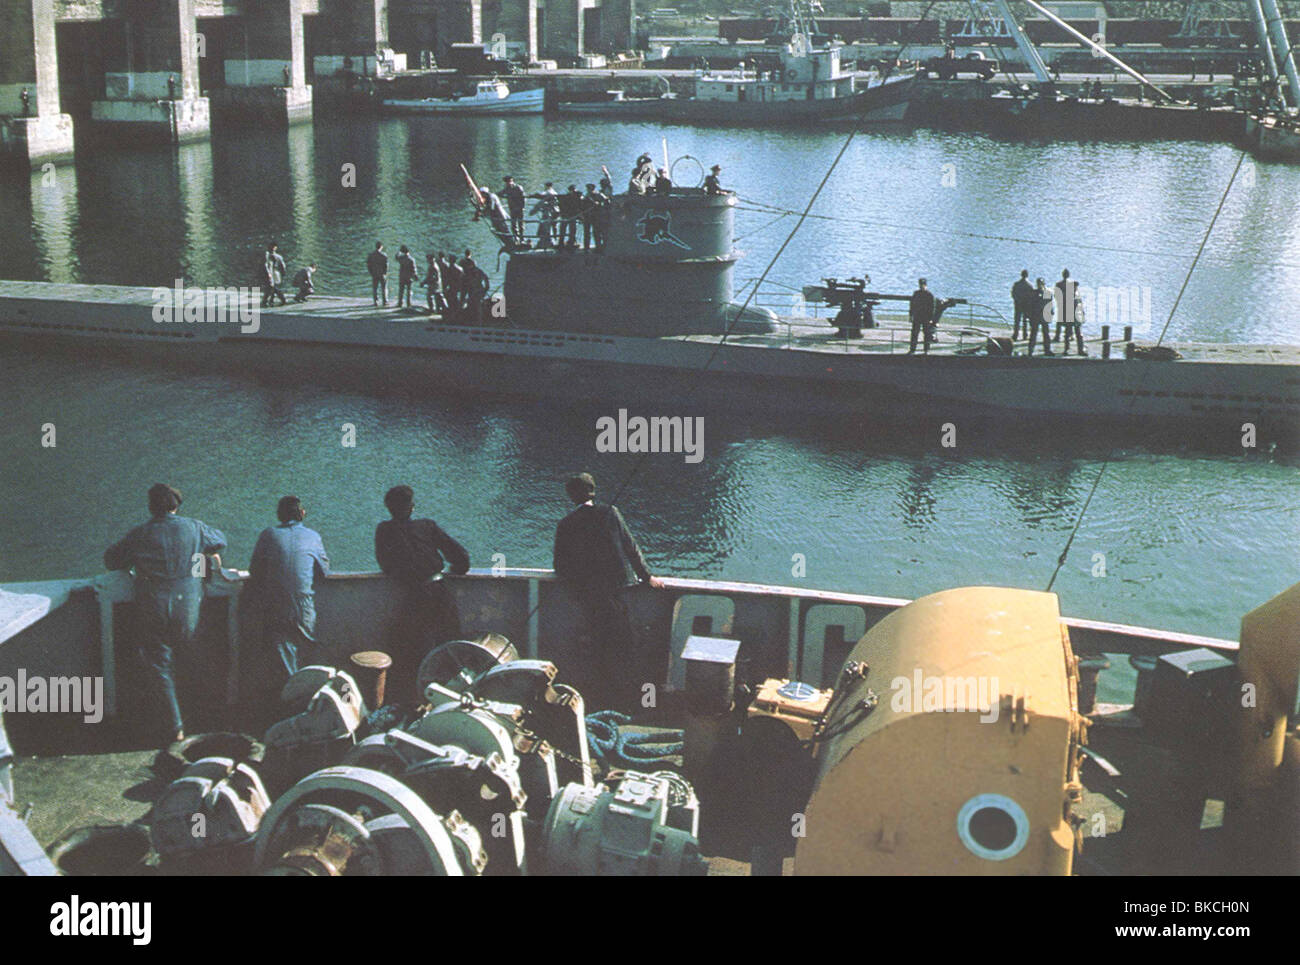 THE BOAT (1981) DAS BOOT (ALT) TBOT 002FOH Stock Photo